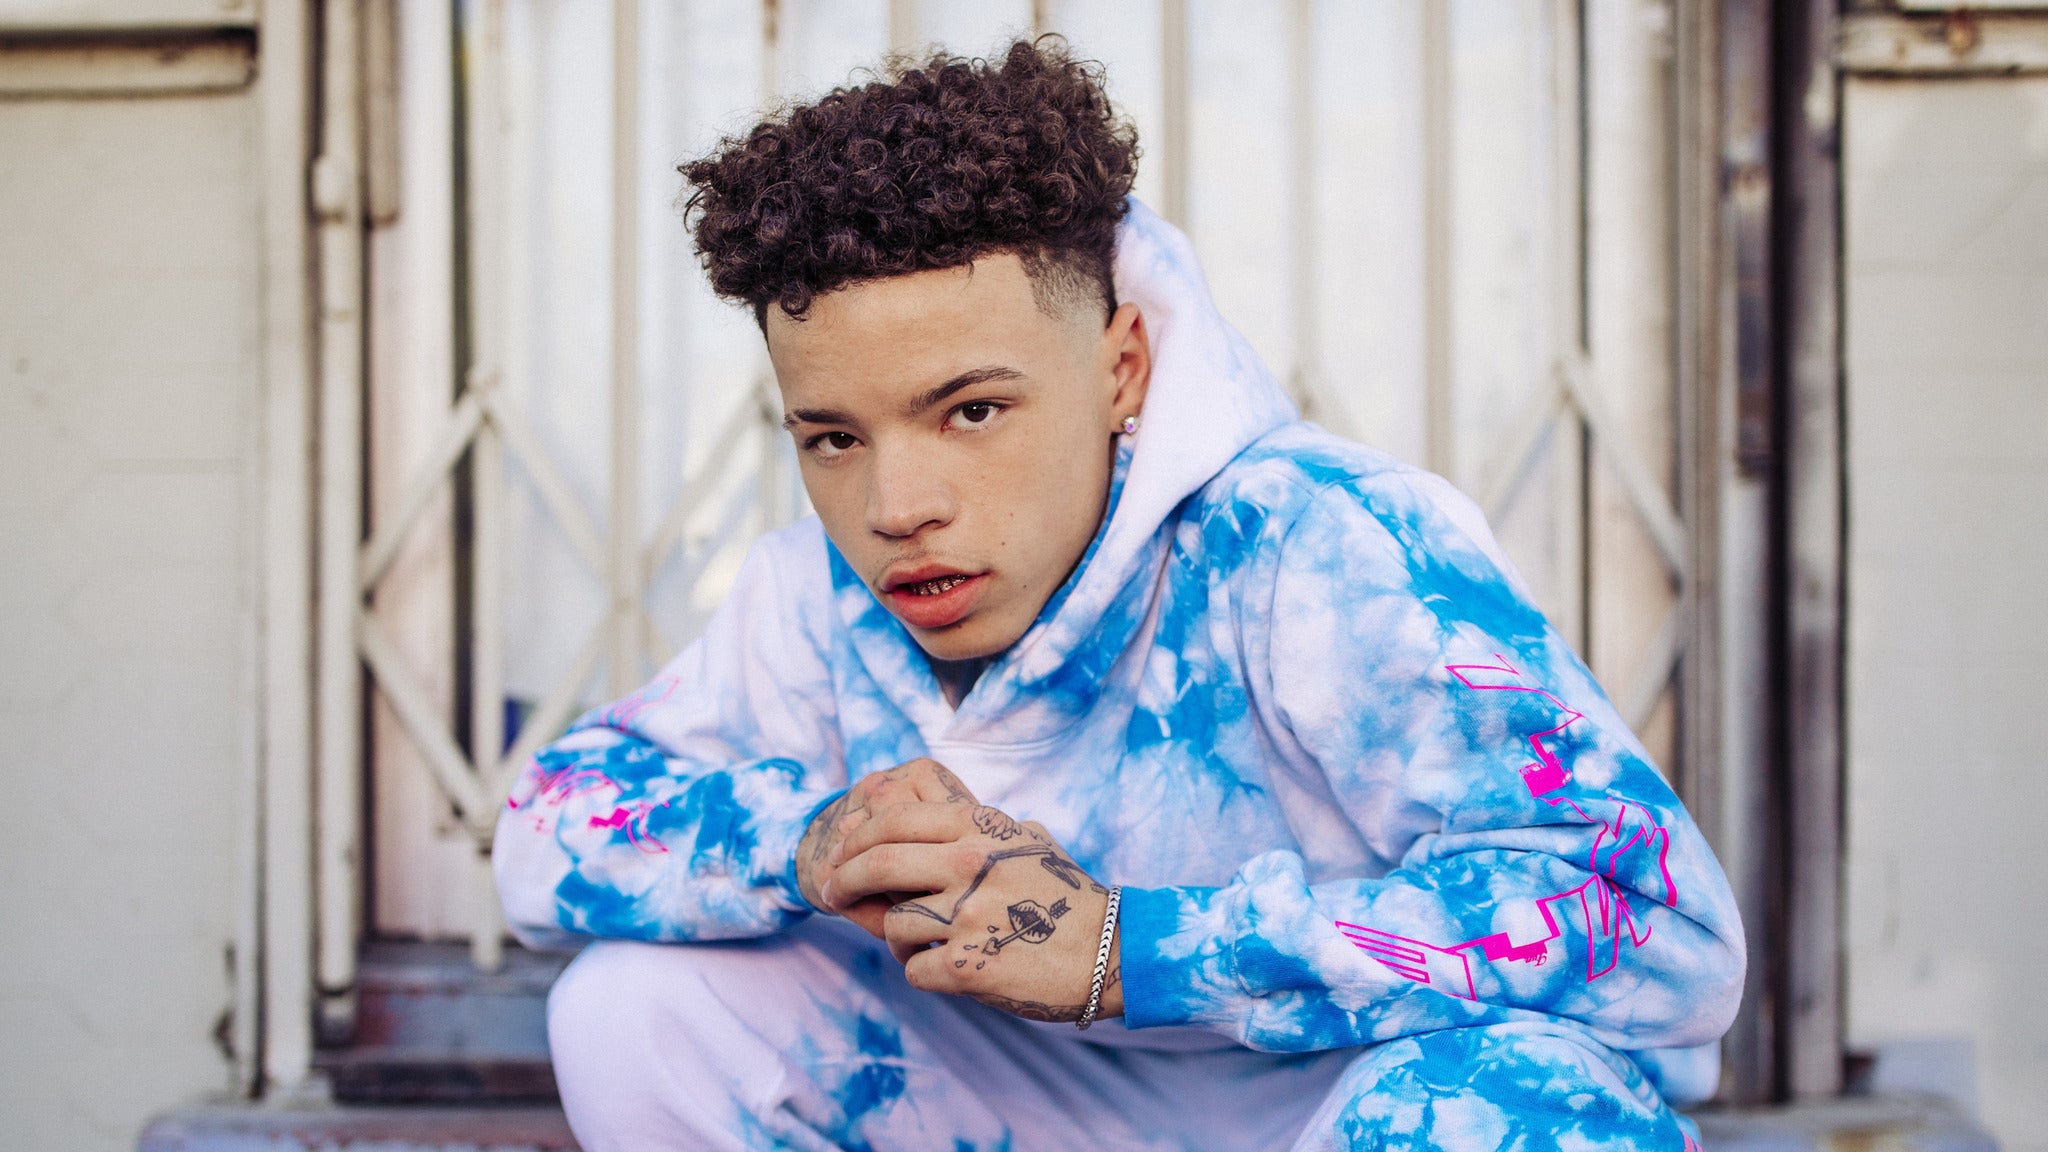 Lil Mosey - Certified Hitmaker North American Tour 2020 in San Diego promo photo for VIP presale offer code